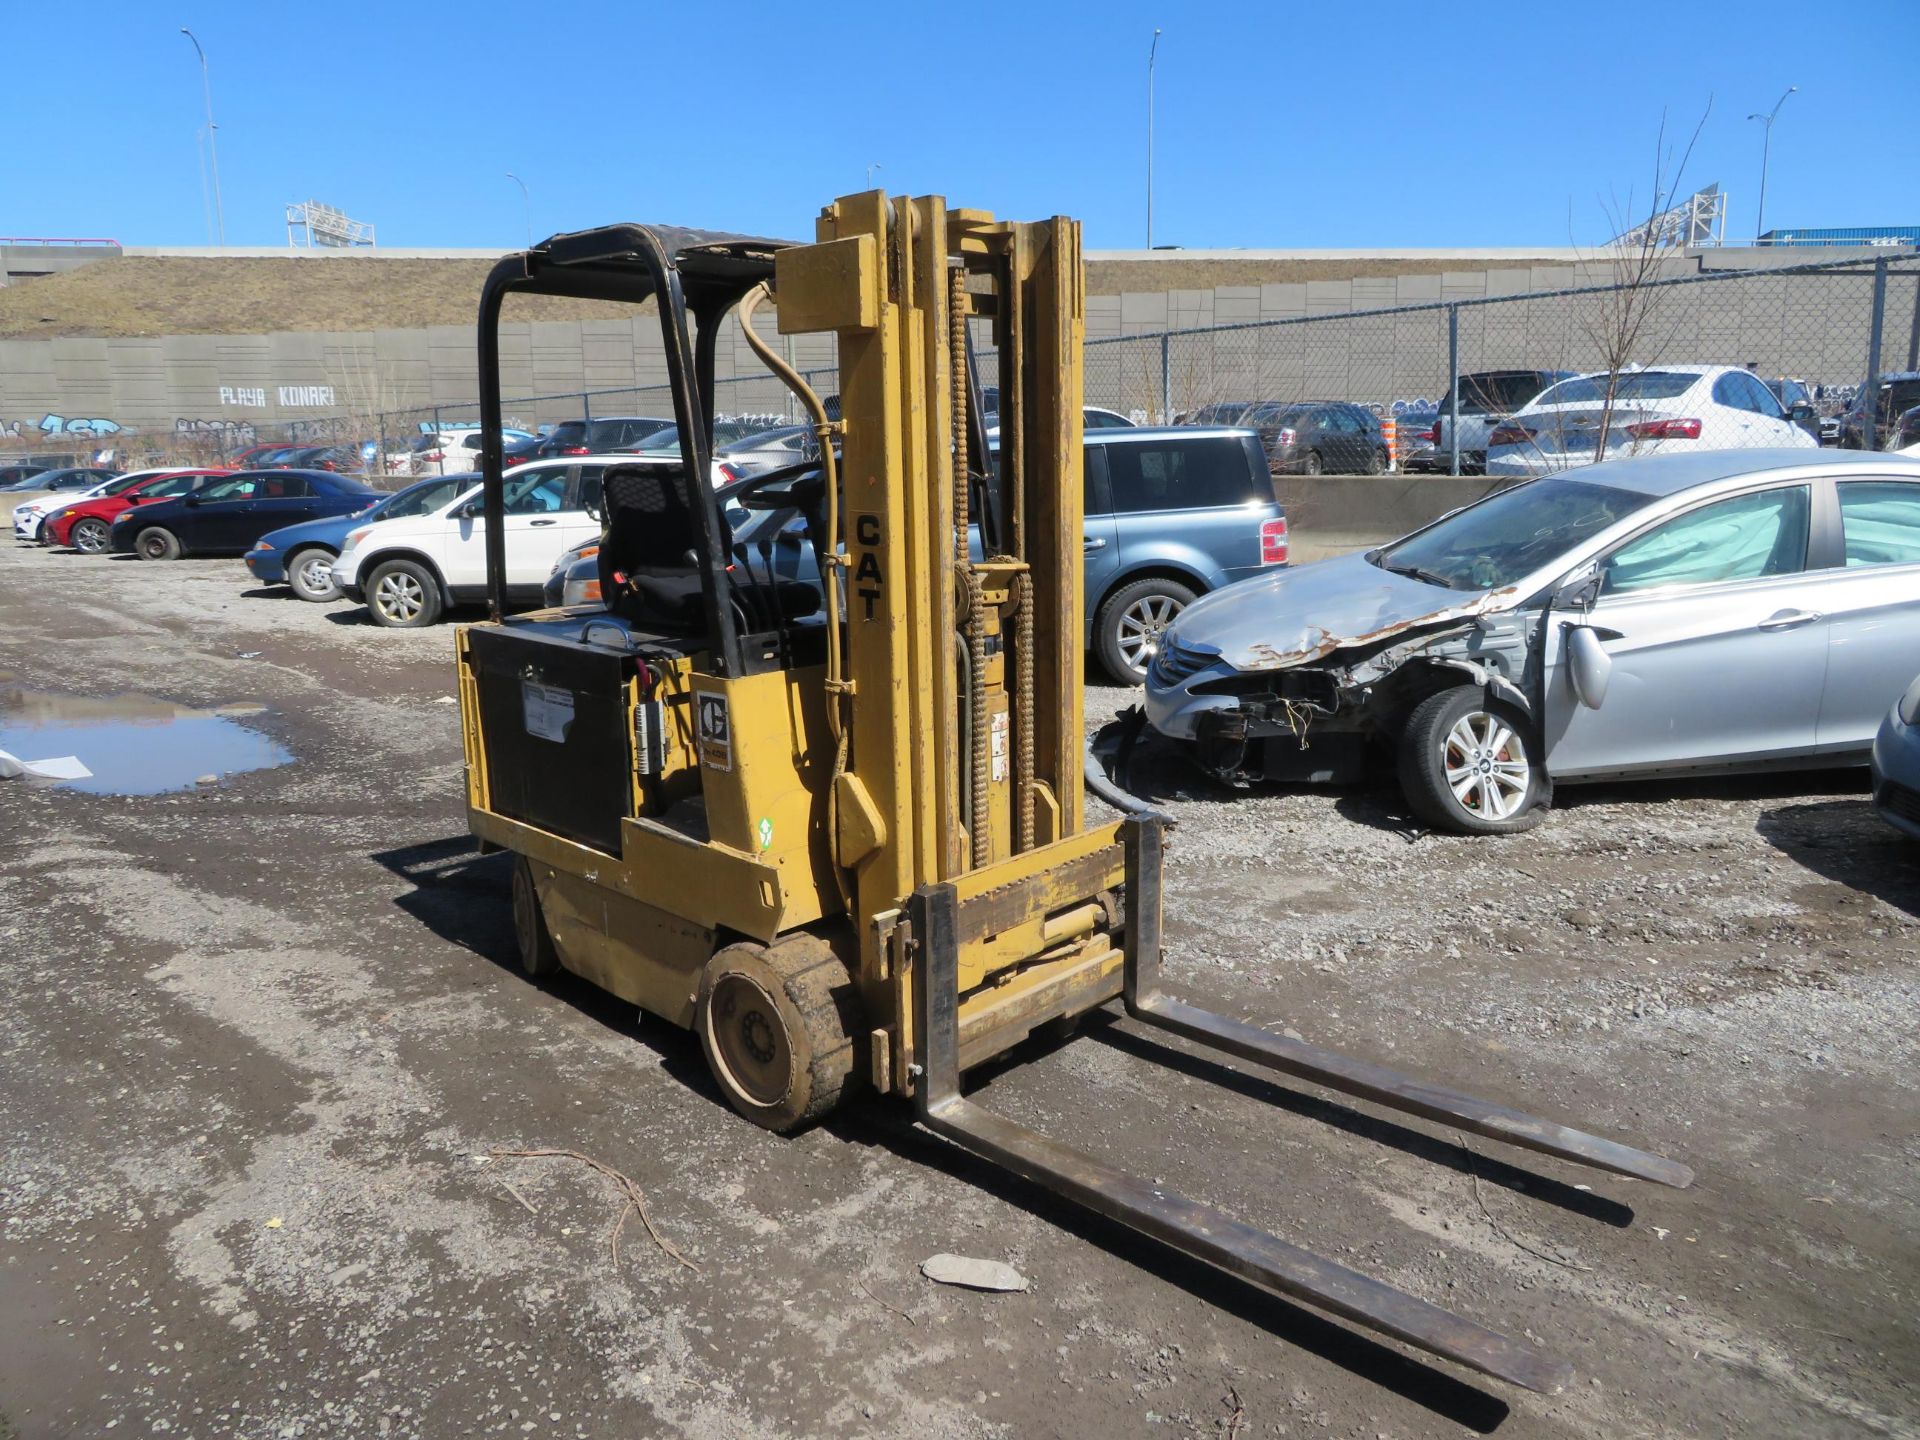 CATERPILLAR electric fork lift, Mod# M408, cap: 4,000 LBS, 3 sections, side shift, 36/48 Volts, - Image 2 of 12